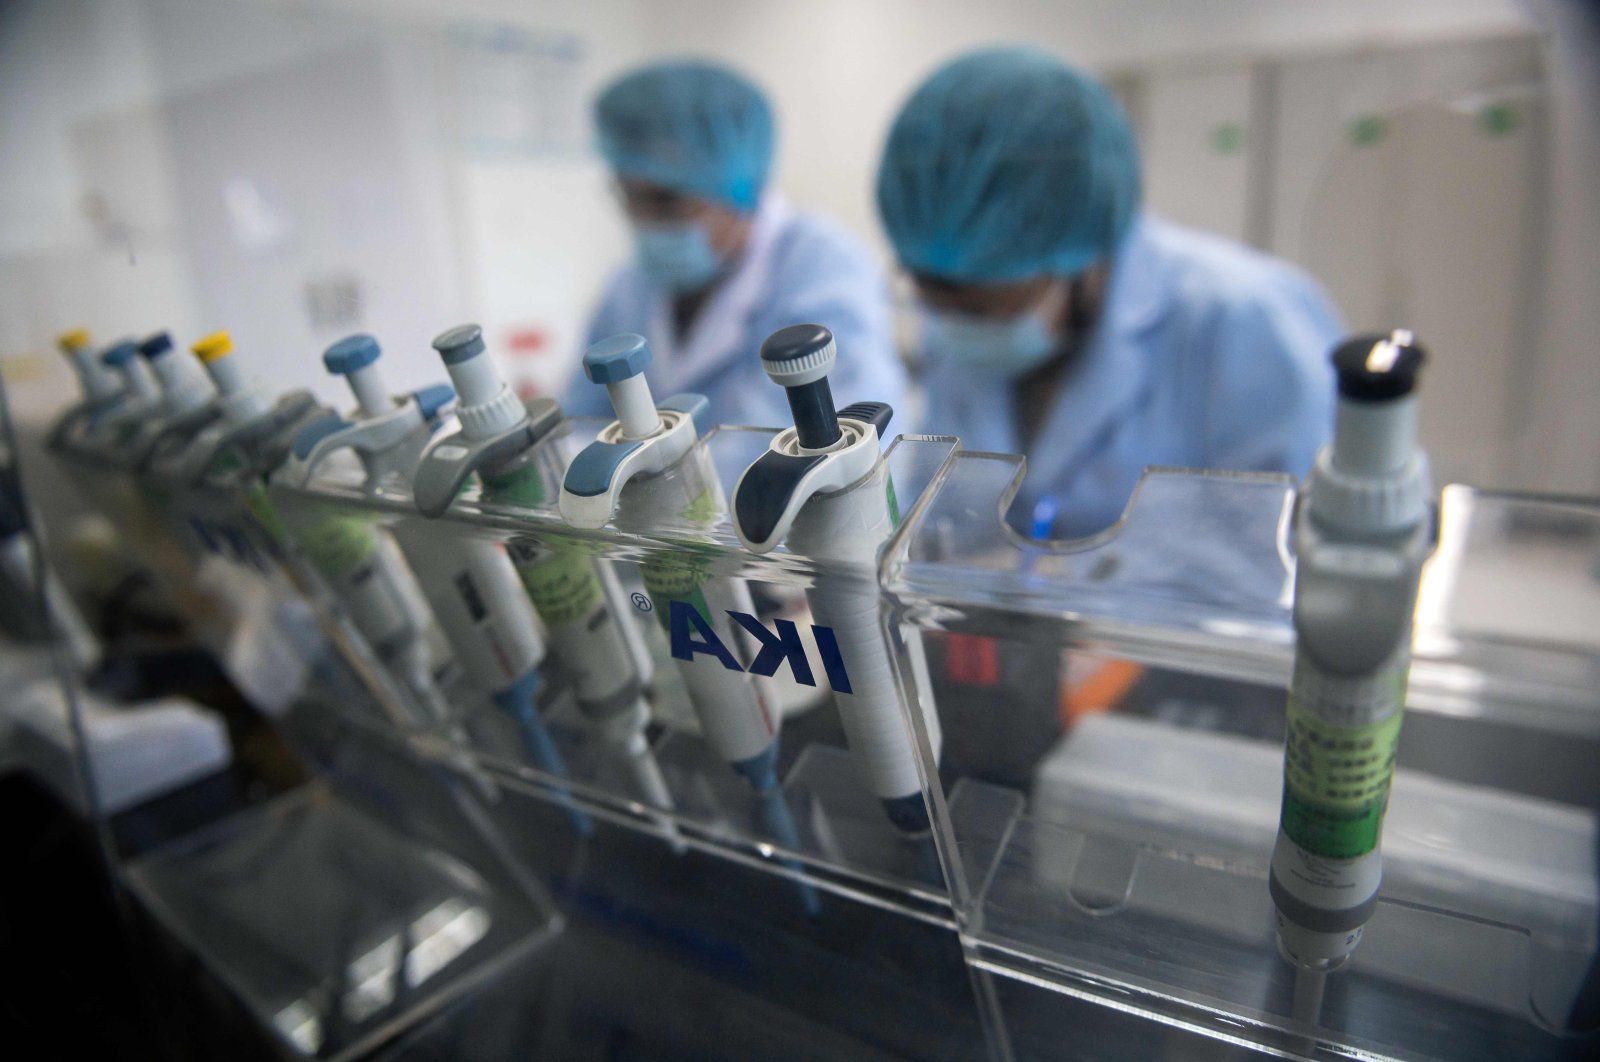 Workers are seen inside the Beijing Applied Biological Technologies (XABT) research and development laboratory, Beijing, May 14, 2020. (AFP Photo)